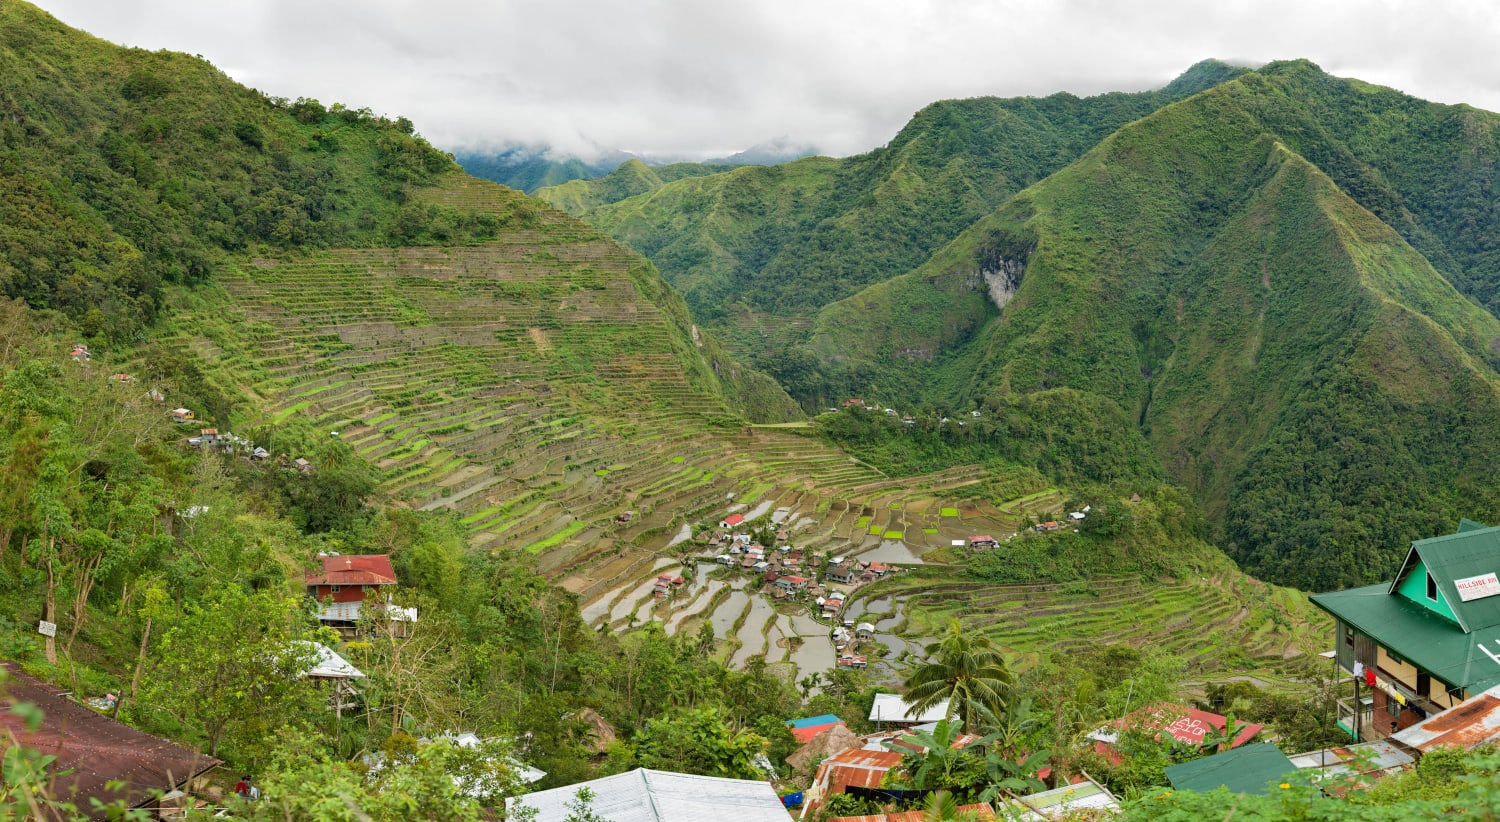 Batad (Banaue) Rice Terraces, Mountain Province, Philippines. These are estimated at over 2000 years old and still in operation today.